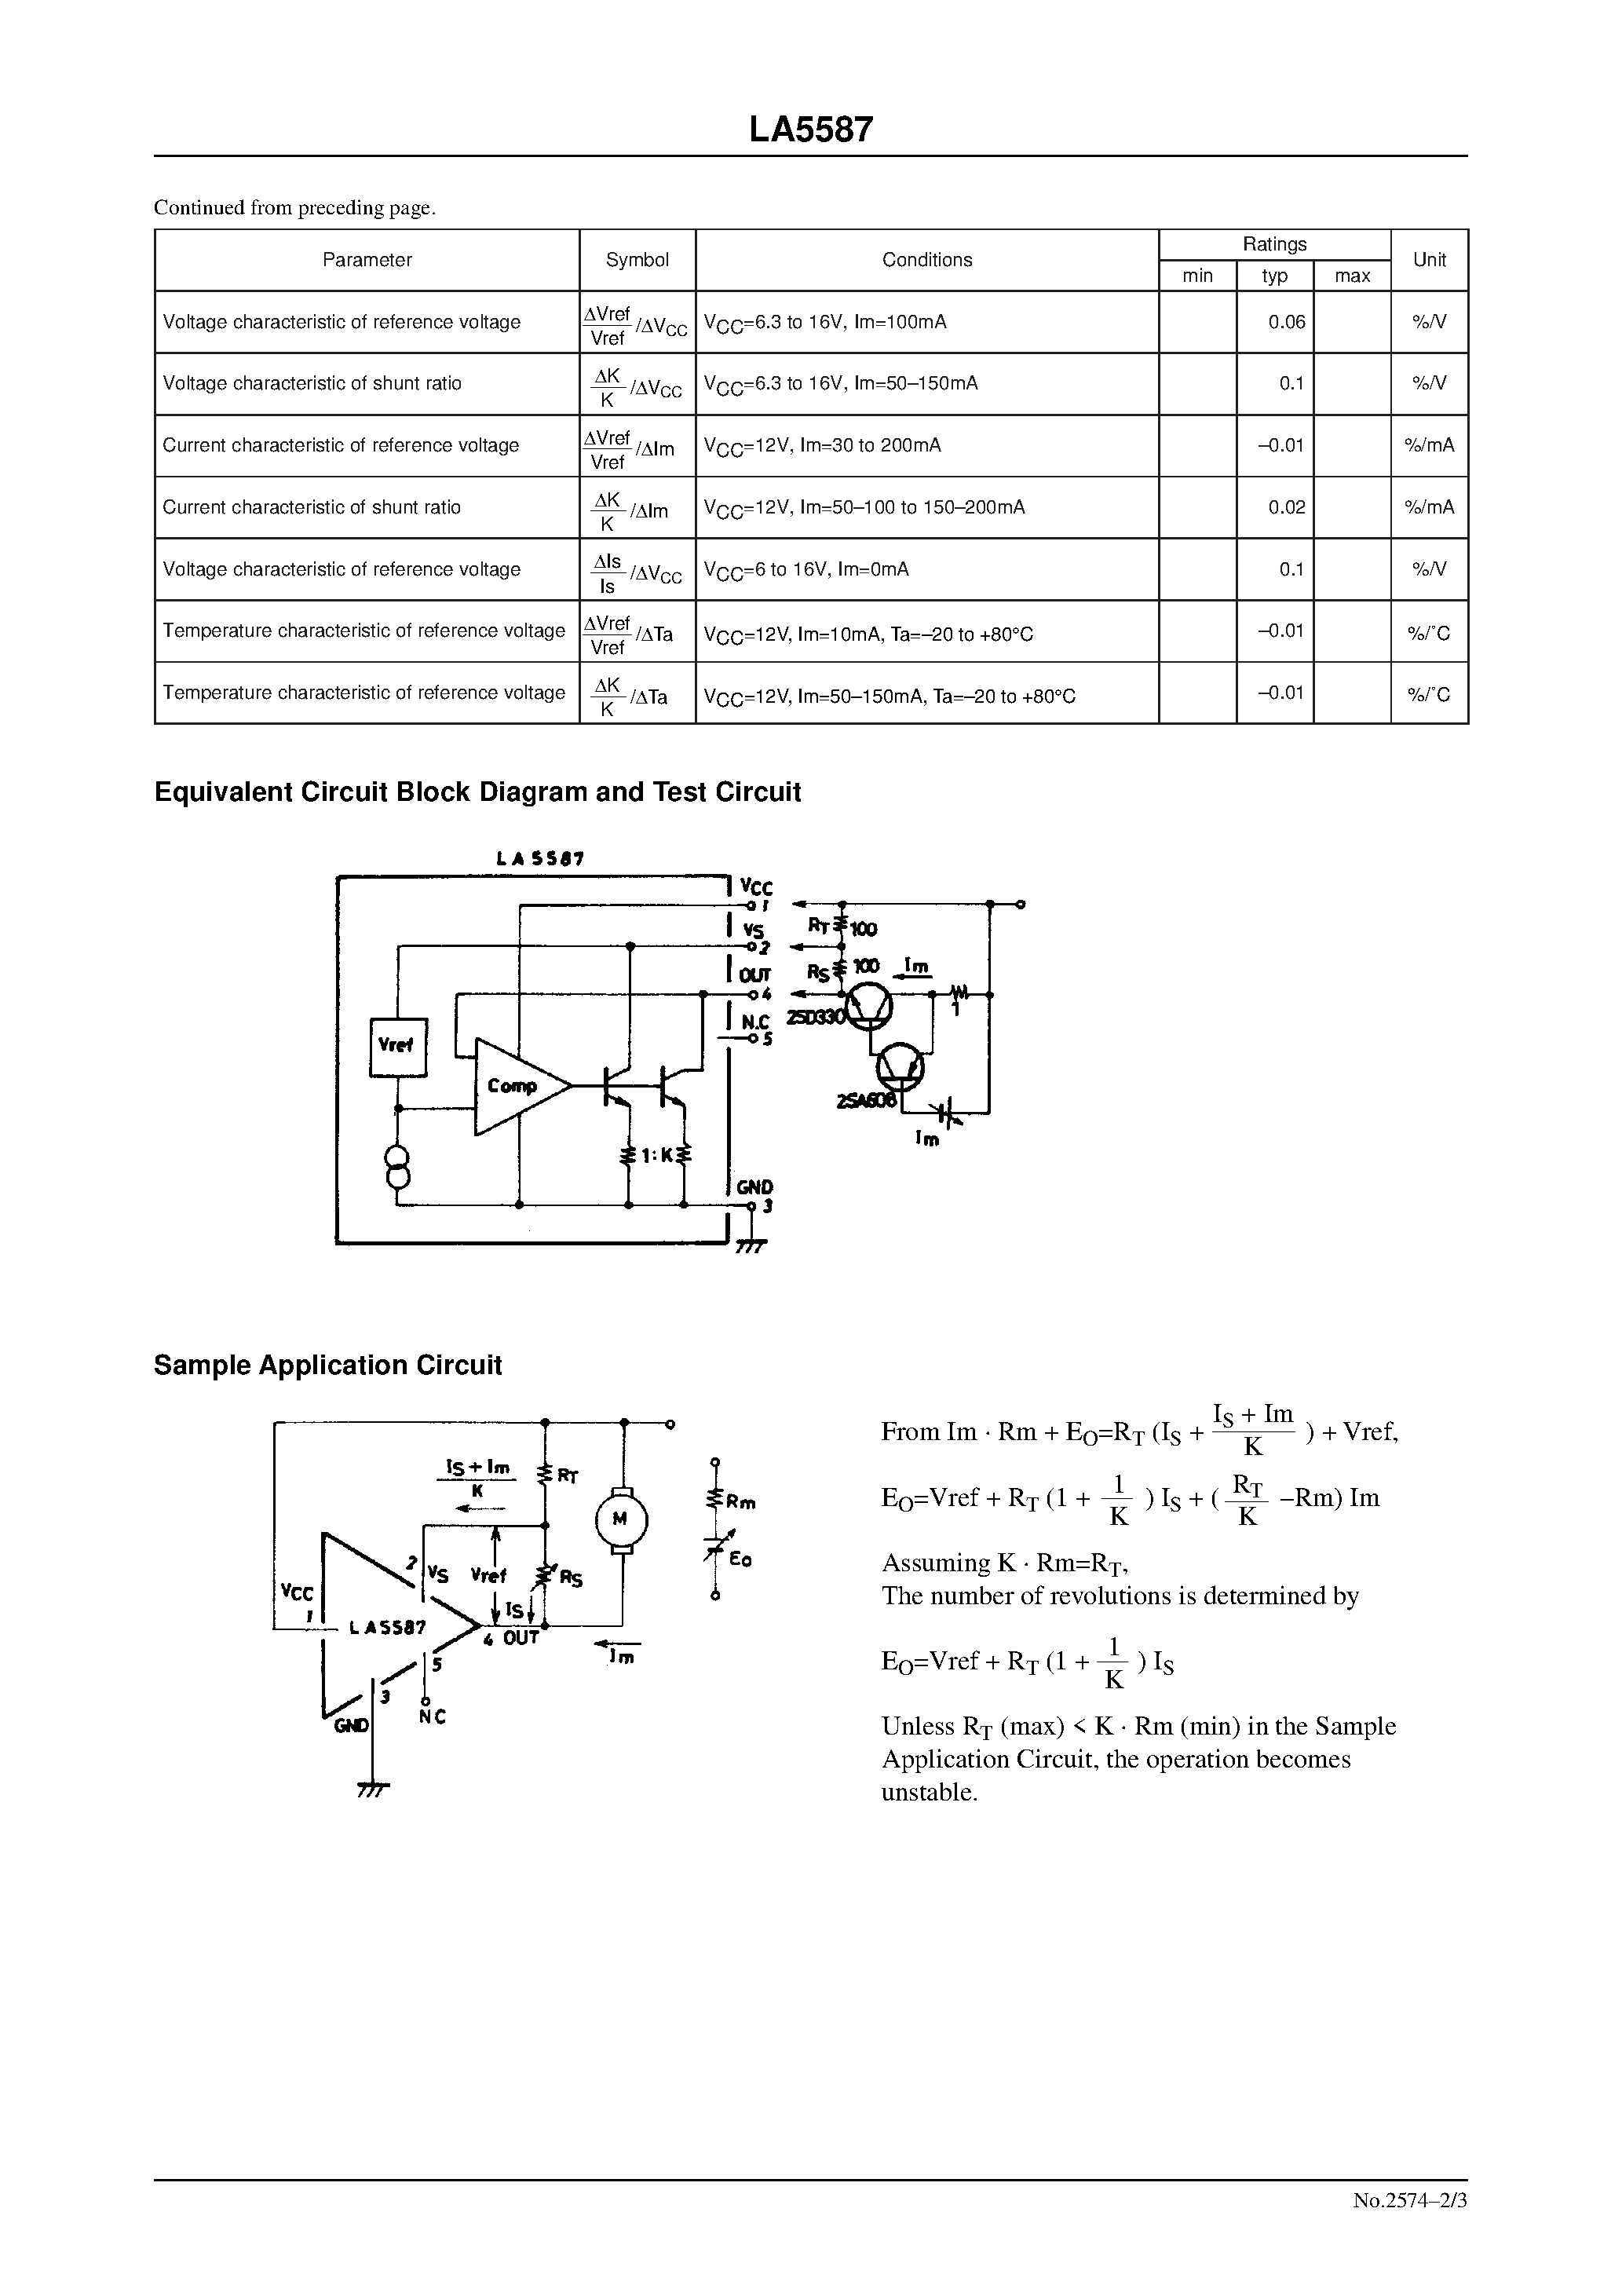 Datasheet LA5587 - General-Purpose Compact DC Moter Speed Controller page 2